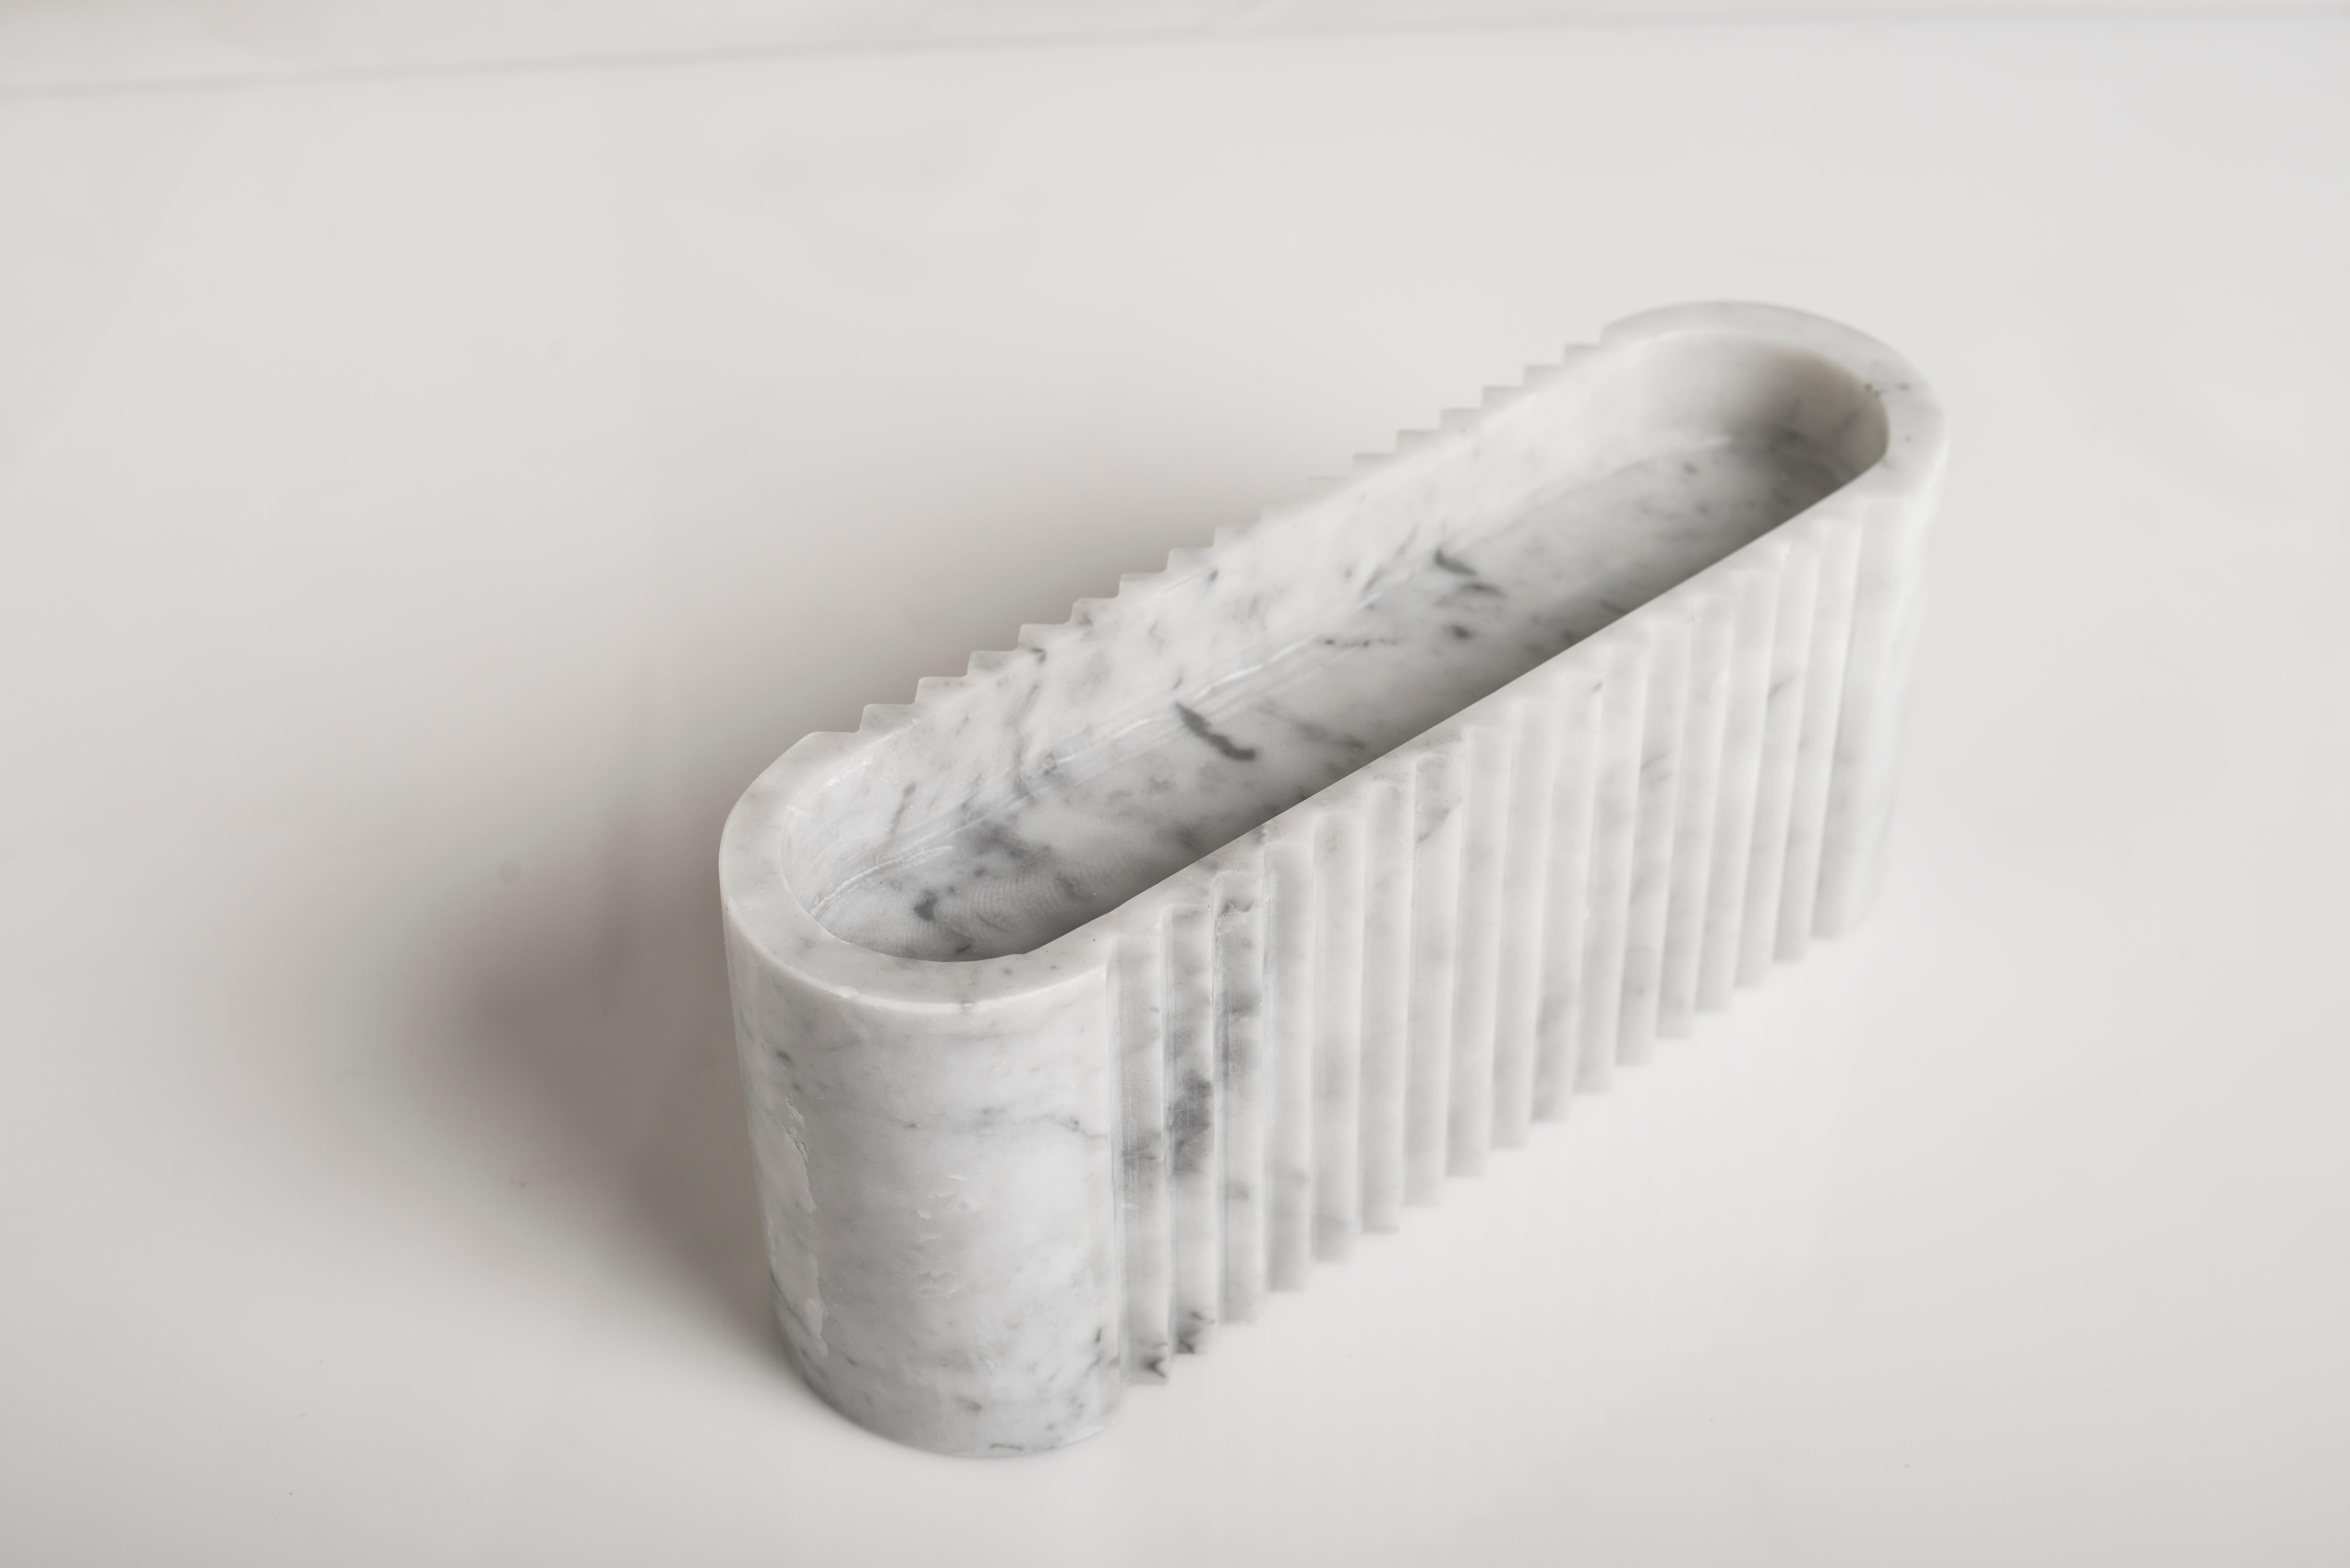 London sculpture by Carlo Massoud
Handmade 
Dimensions: D 8 x W 28.4 x H 12 cm 
Materials: Carrara Marble

Carlo Massoud’s work stems from his relentless questioning of social, political, cultural, and environmental norms. He often pushes his